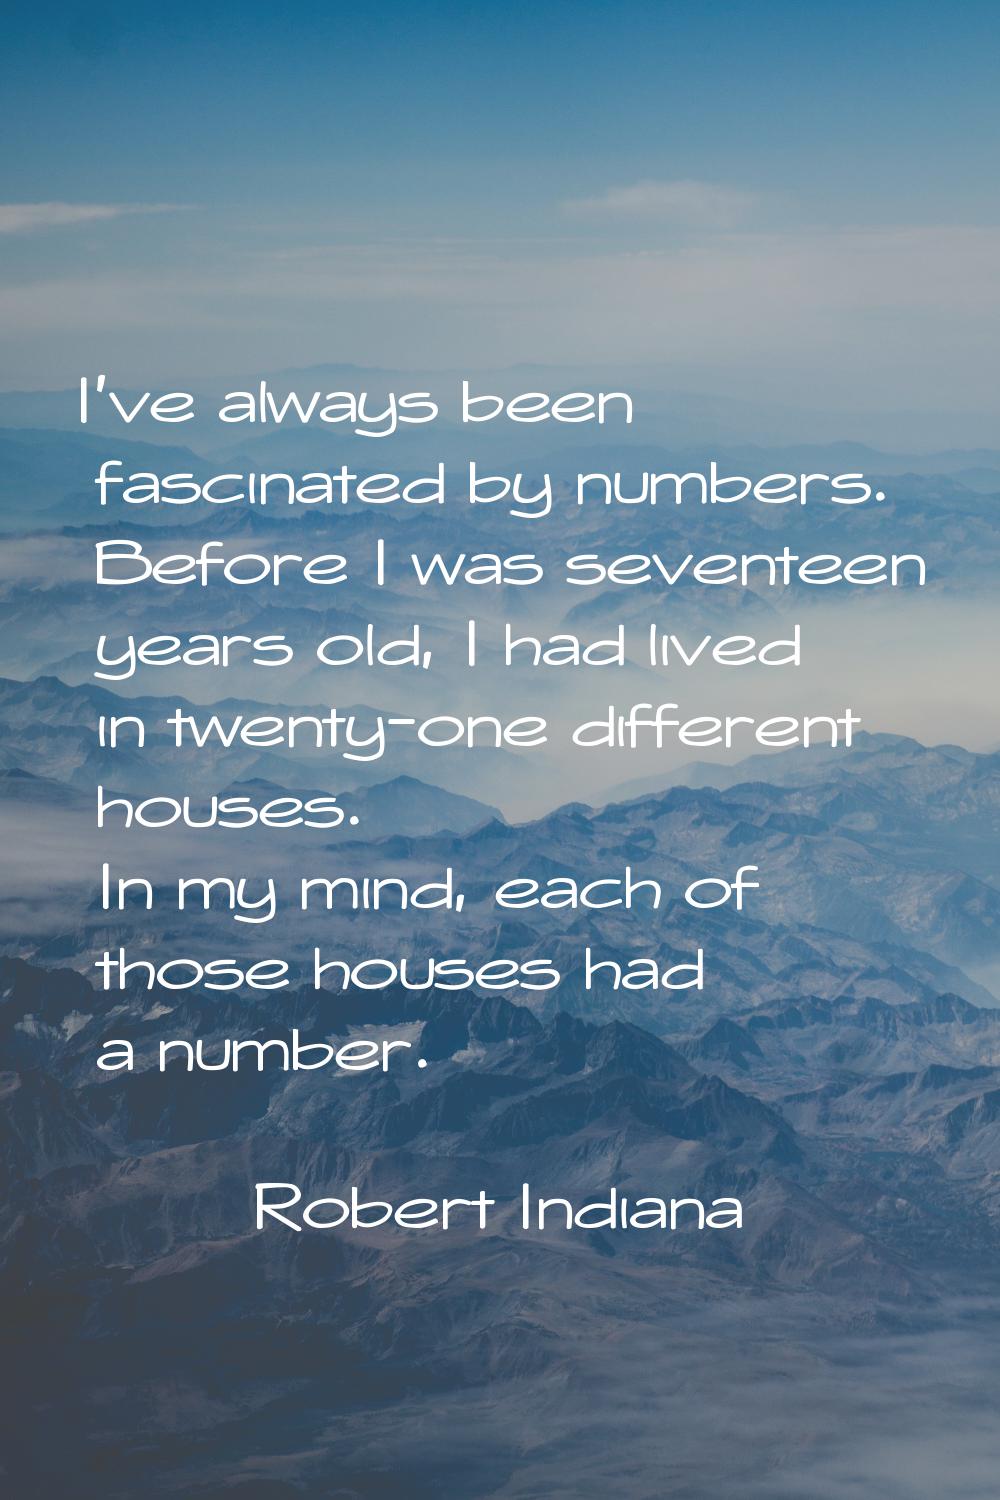 I've always been fascinated by numbers. Before I was seventeen years old, I had lived in twenty-one